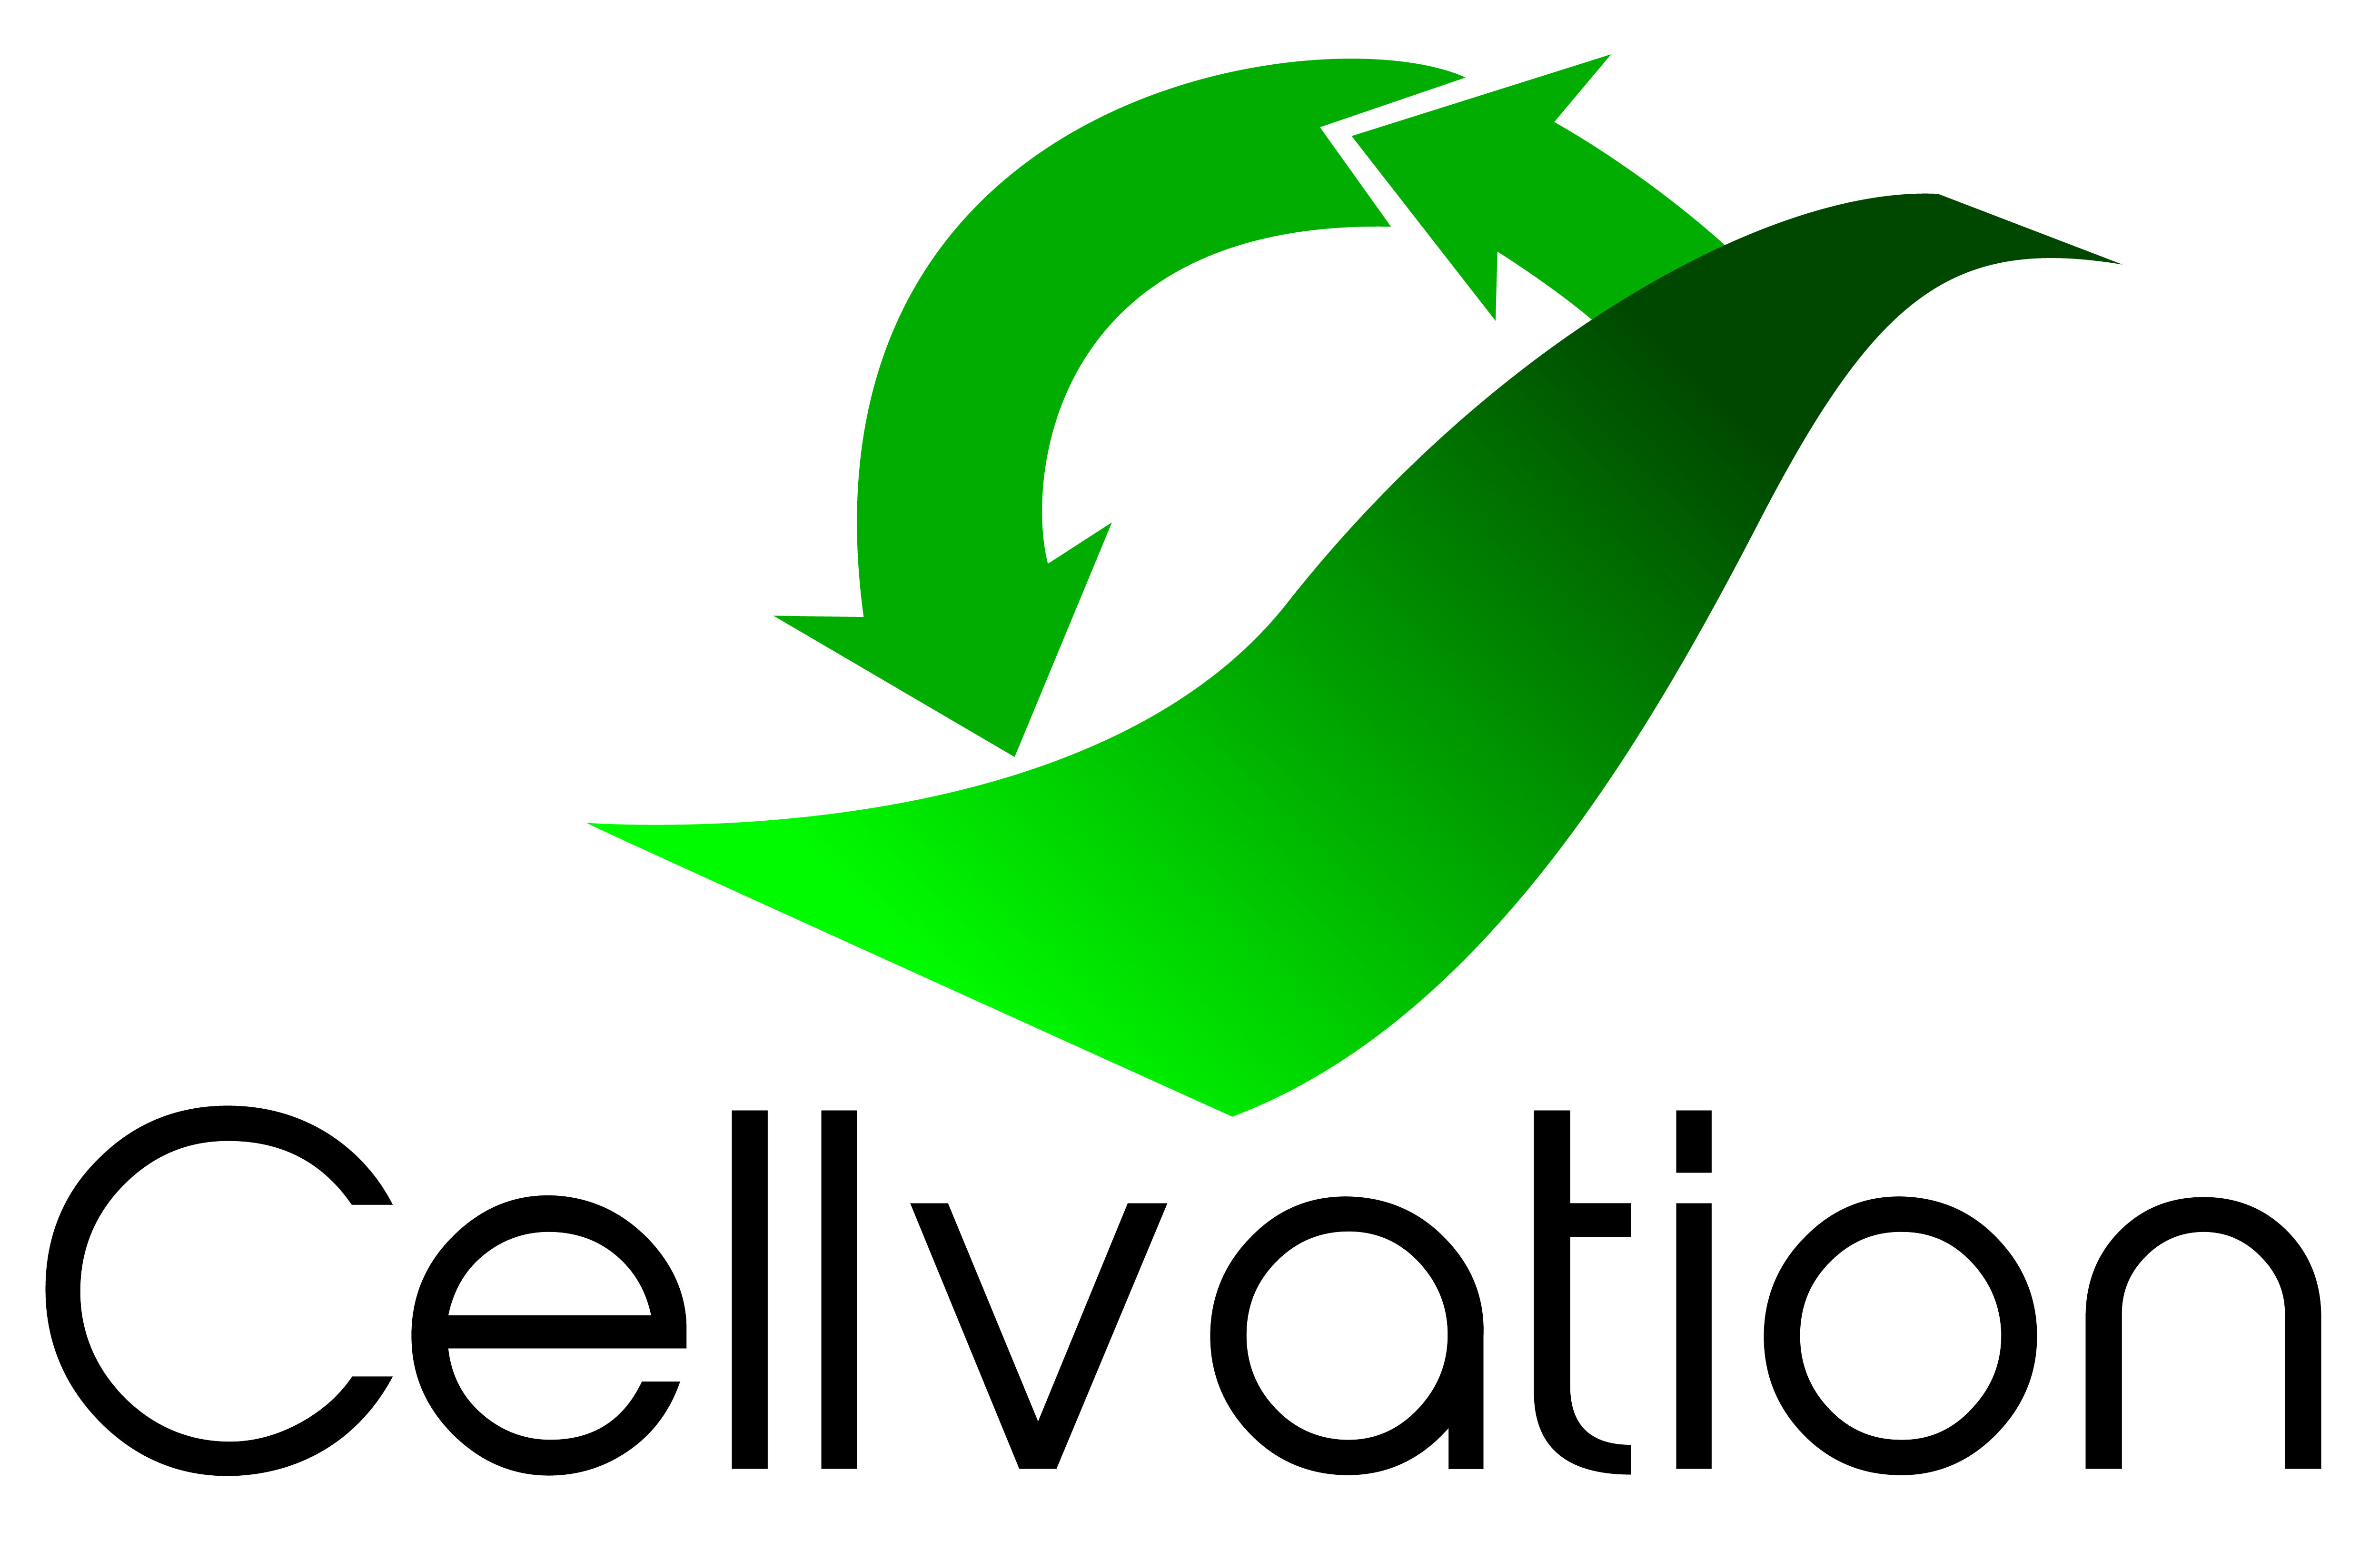 Cellvation - cellulose